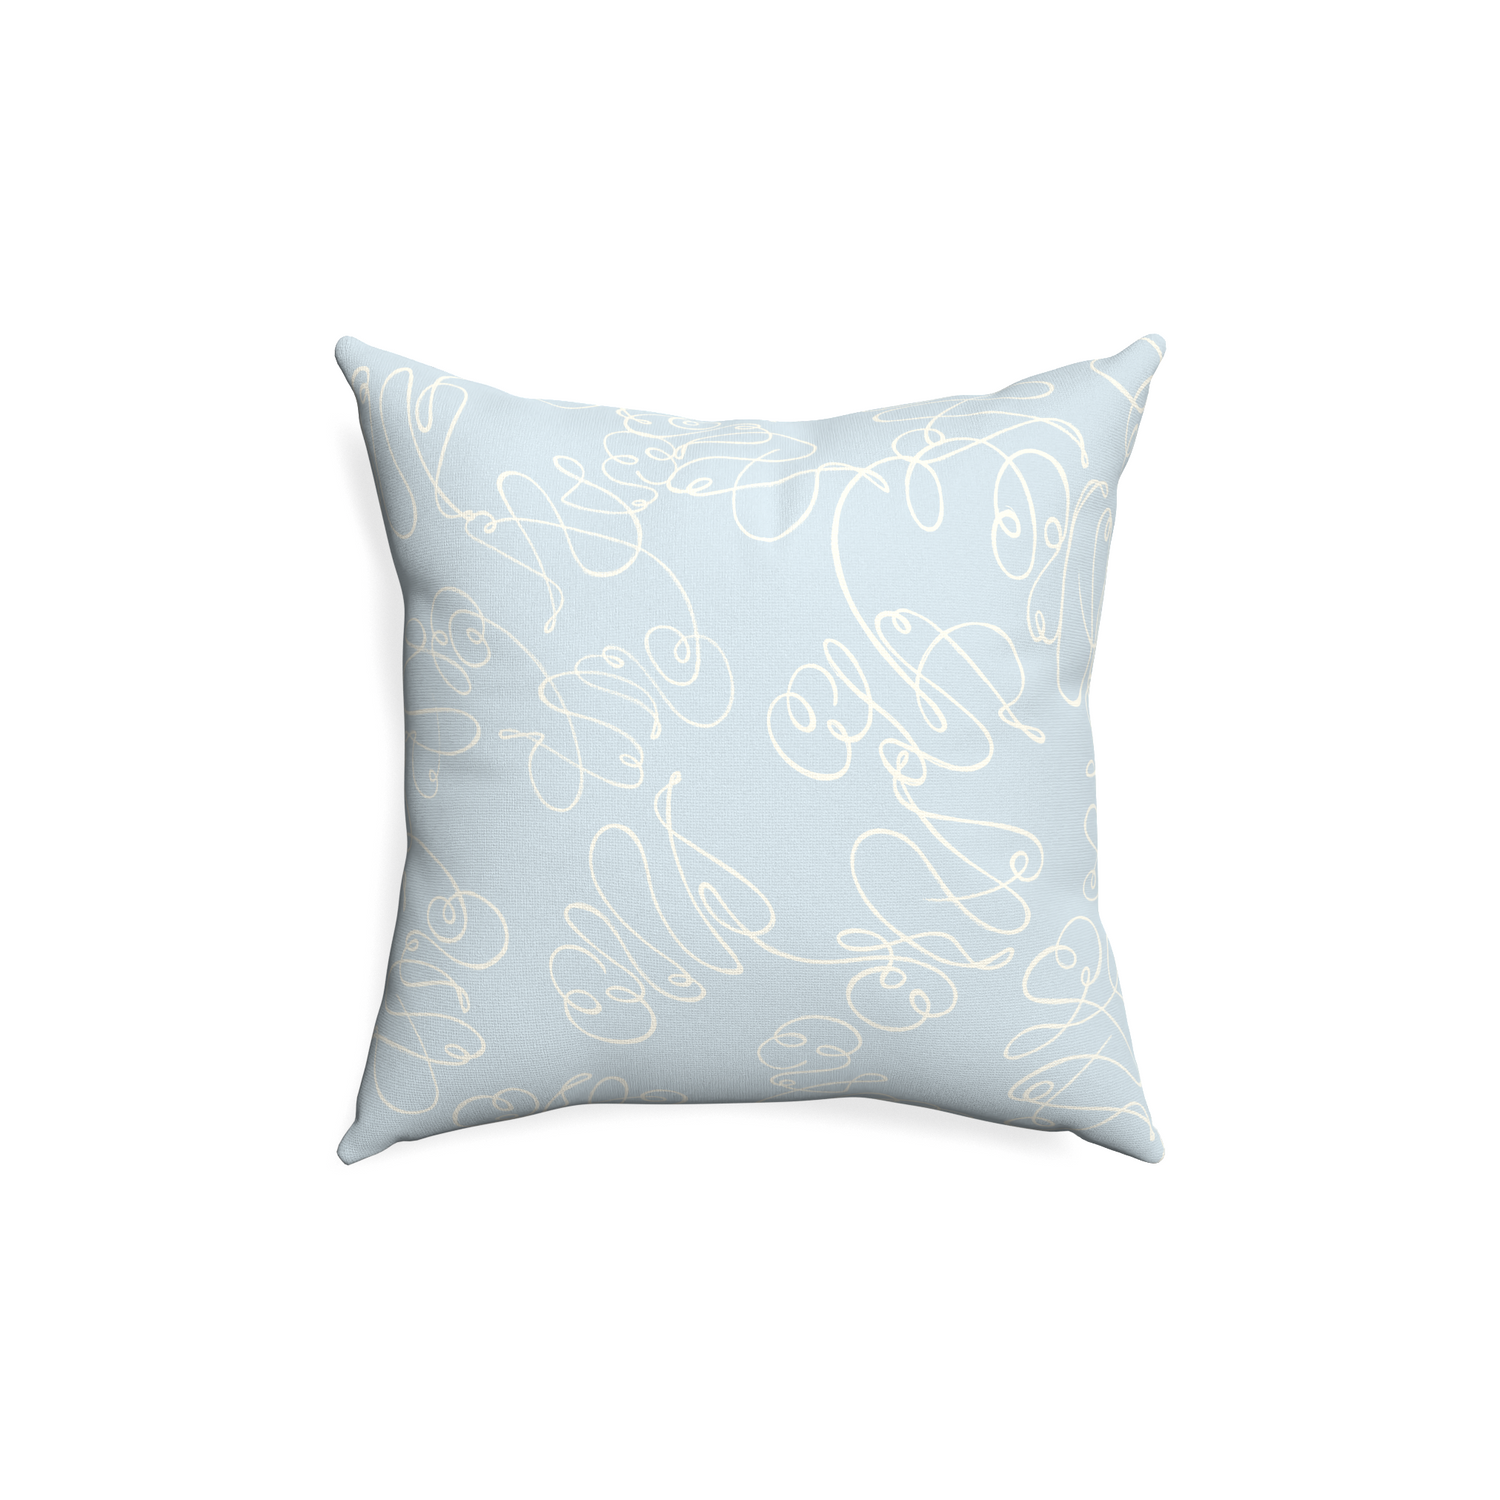 18-square mirabella custom powder blue abstractpillow with none on white background